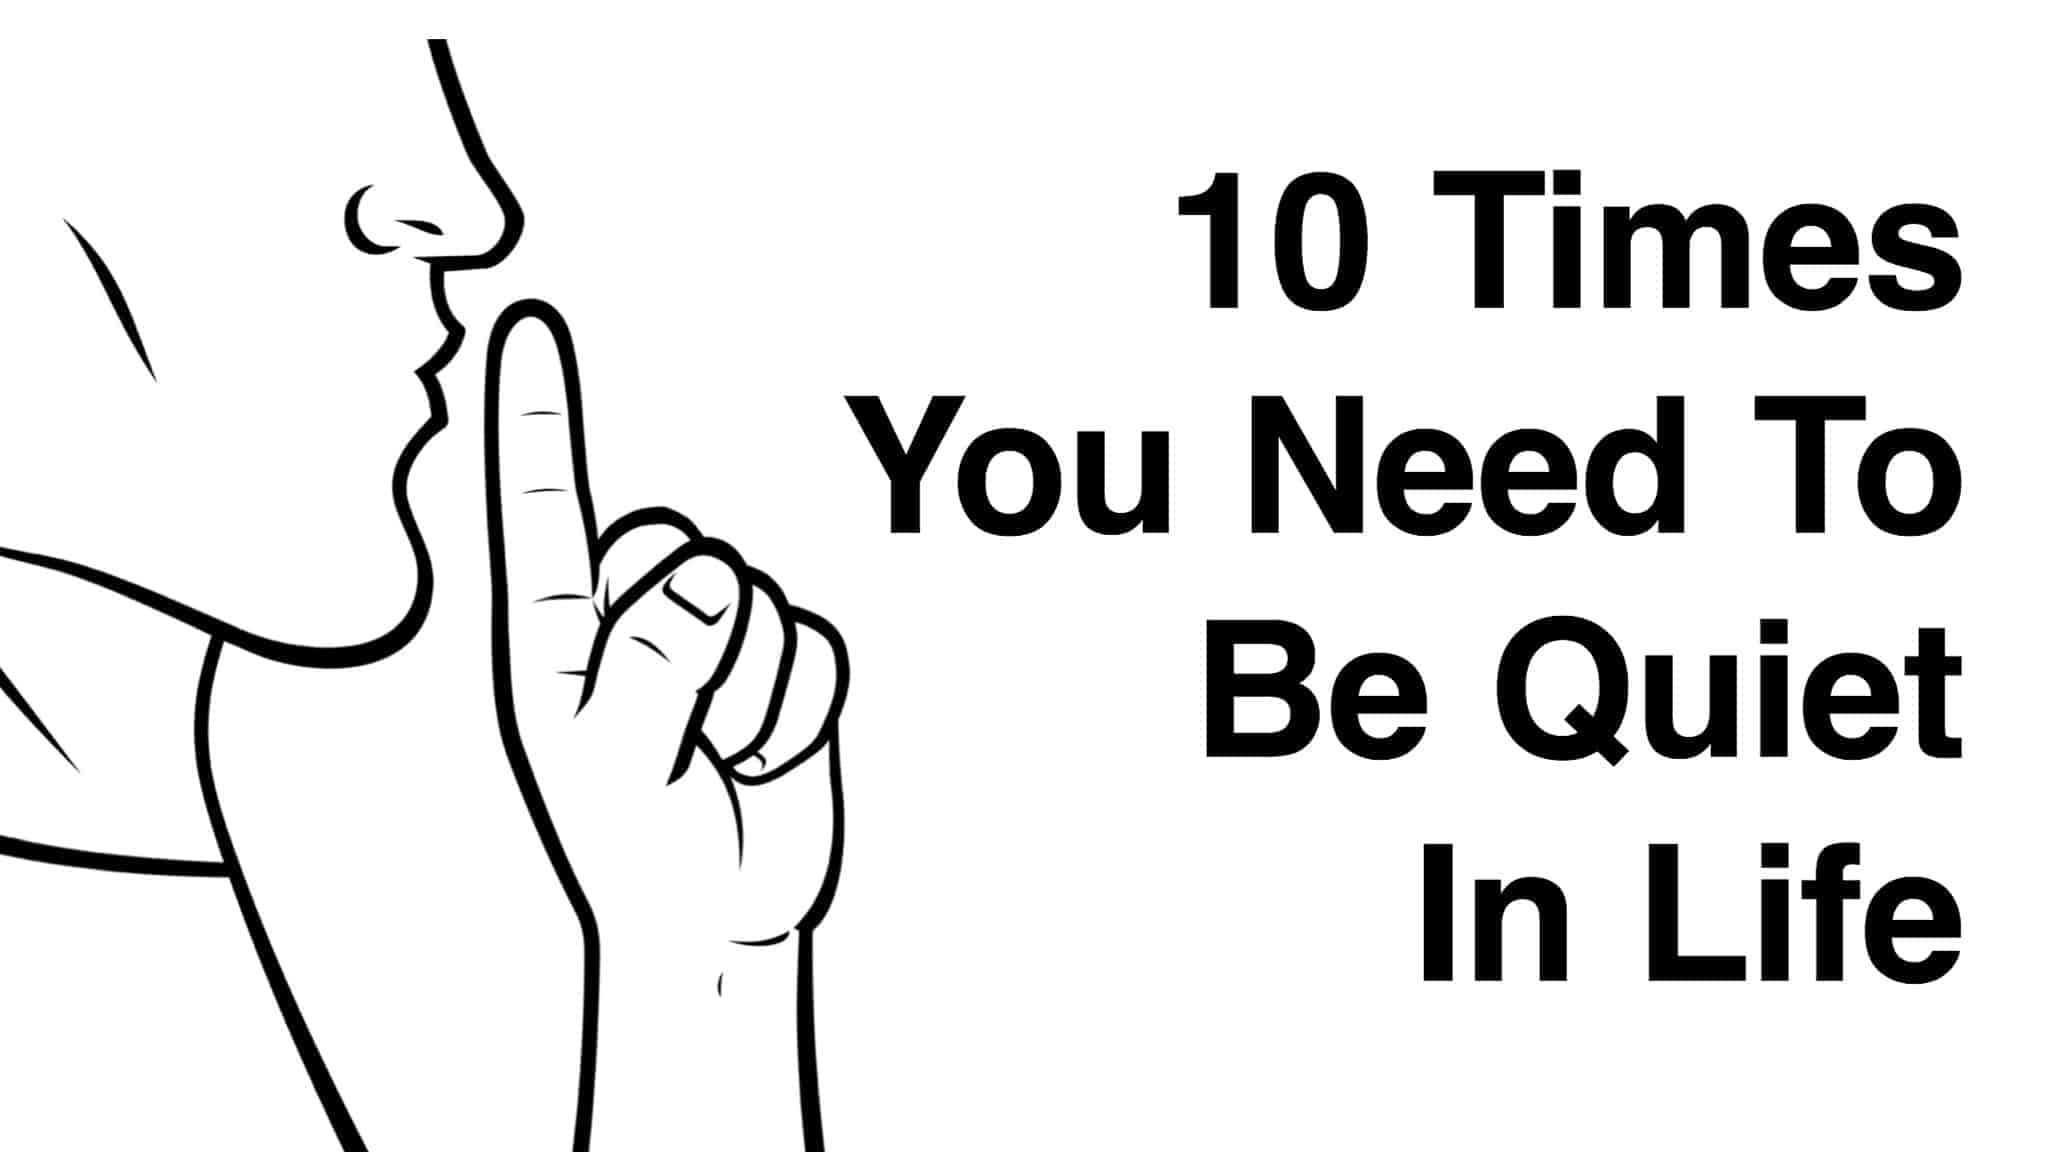 10 Times You Need to Be Quiet In Life